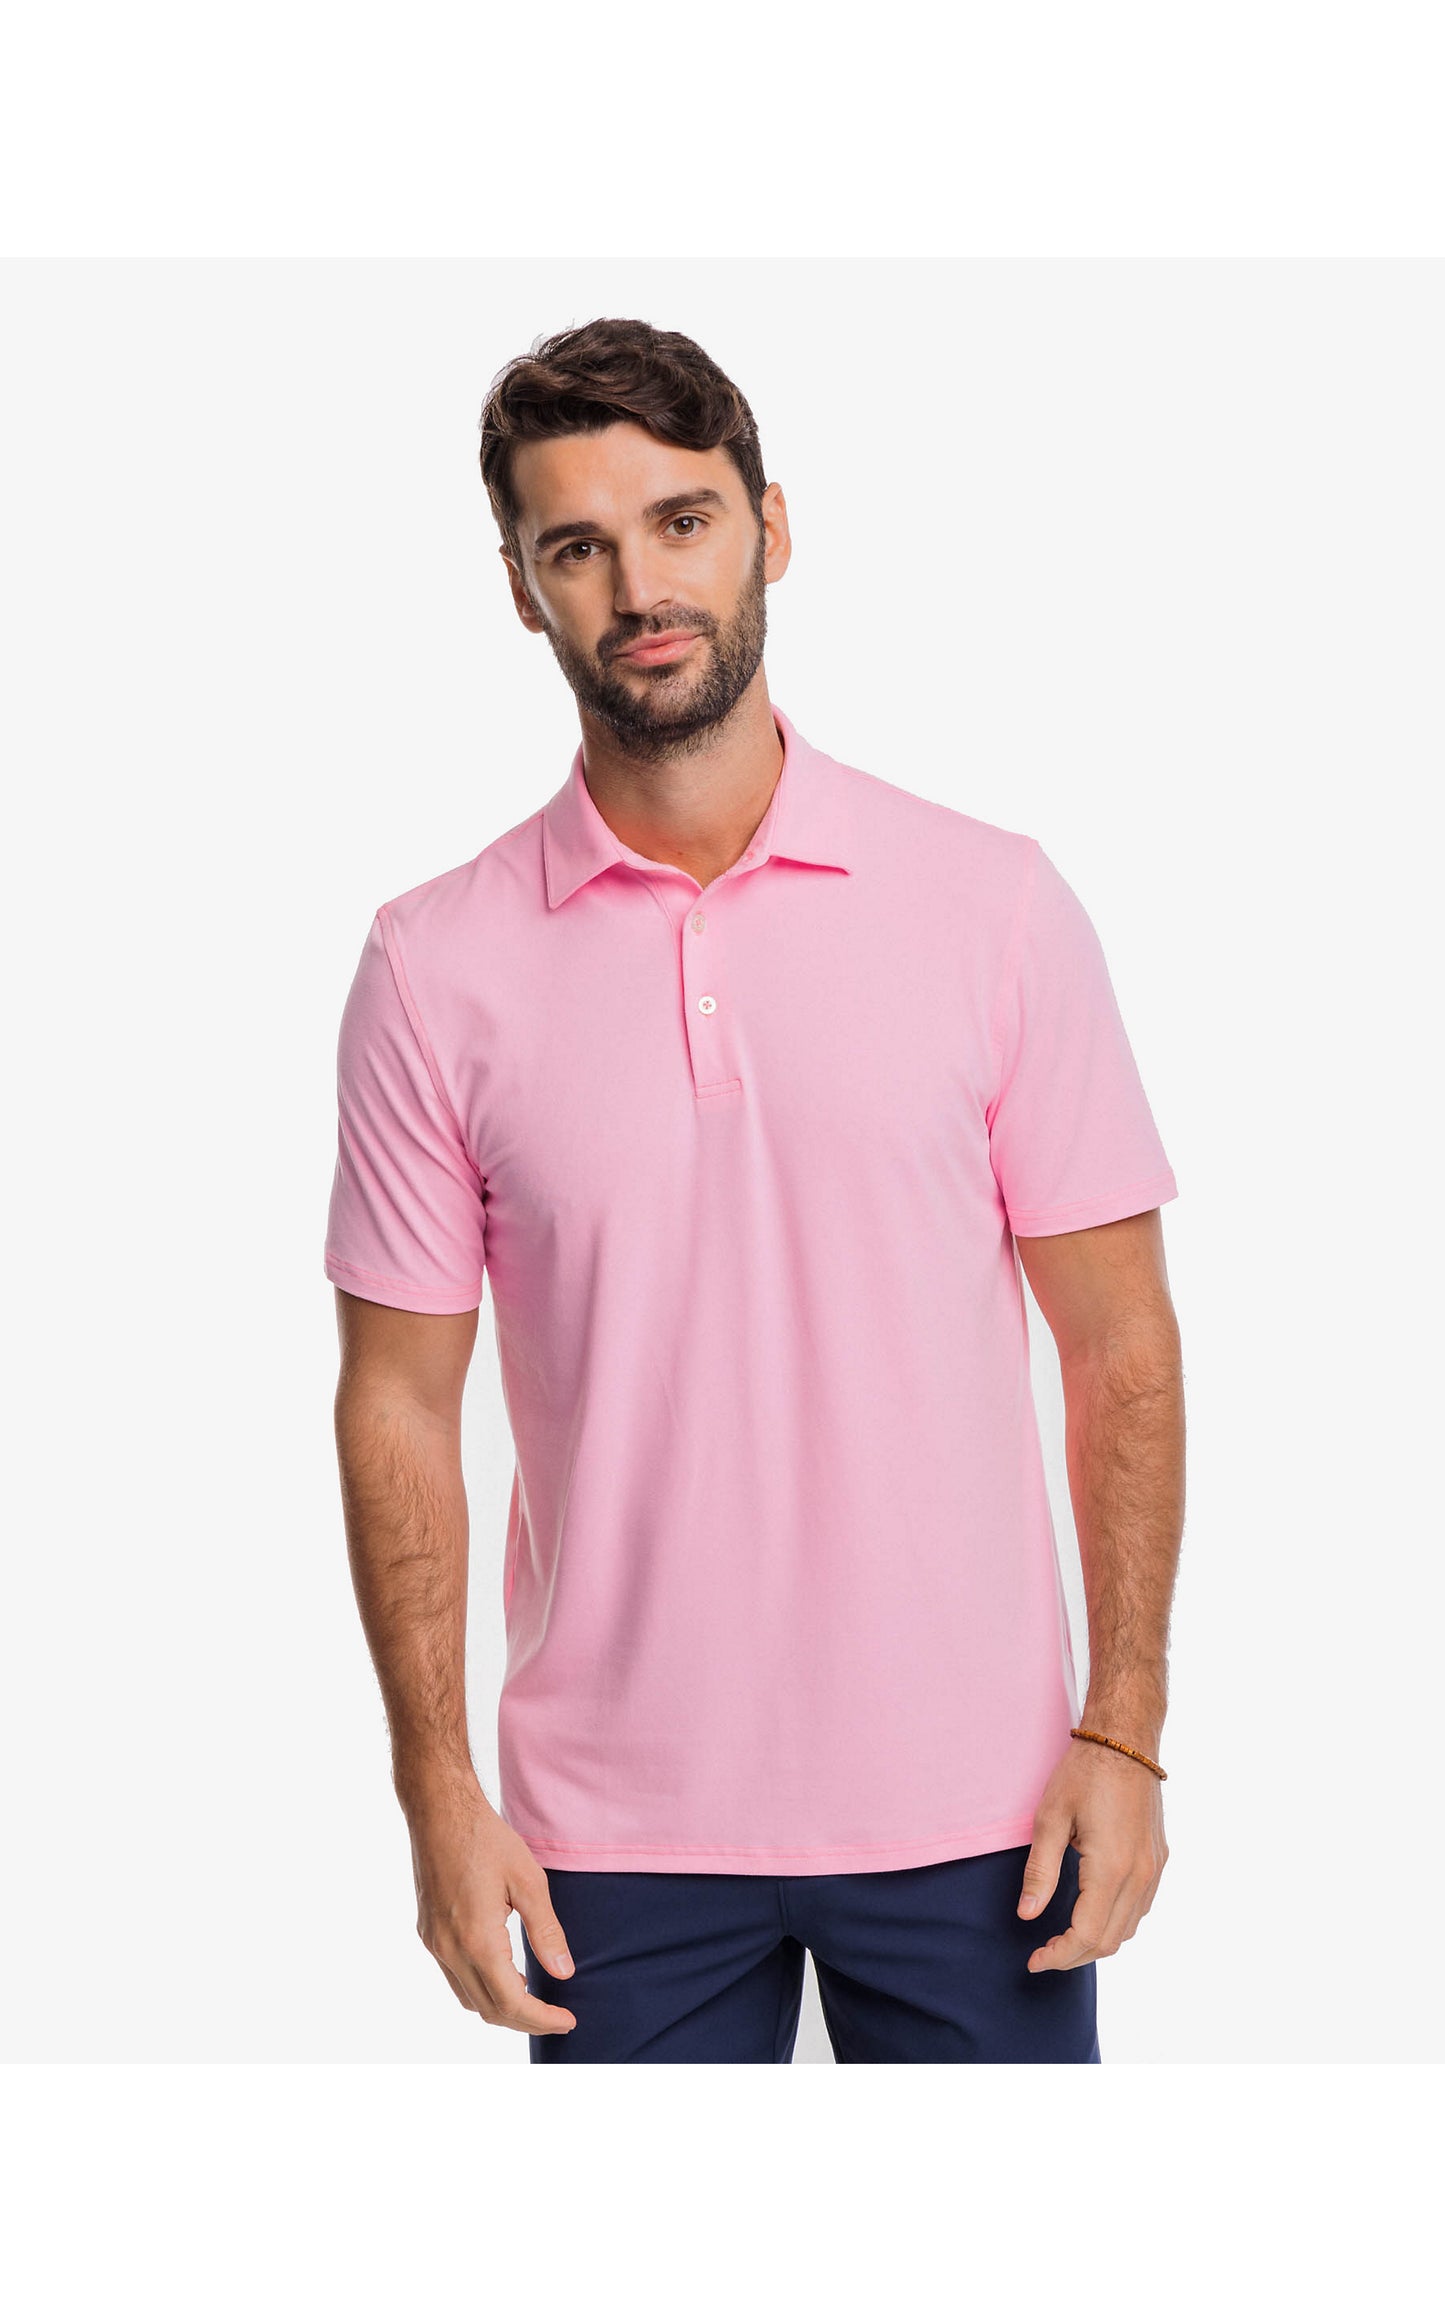 Lilly Pulitzer x Southern Tide: Men's Short Sleeve Ryder Performance Polo in Mandevilla Baby